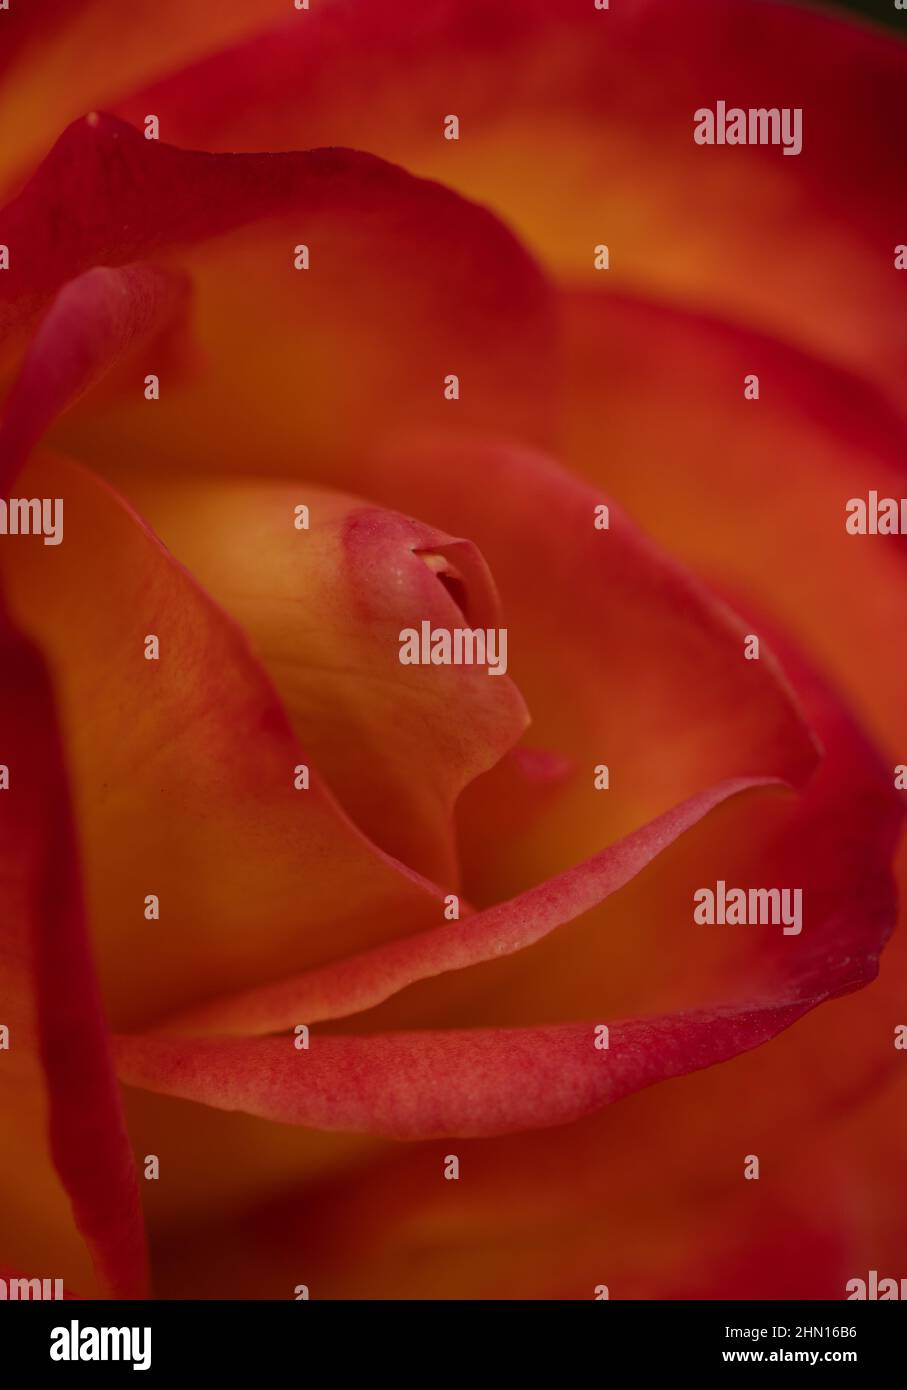 Close up of an orange rose blooming with petals as a texture and background Stock Photo